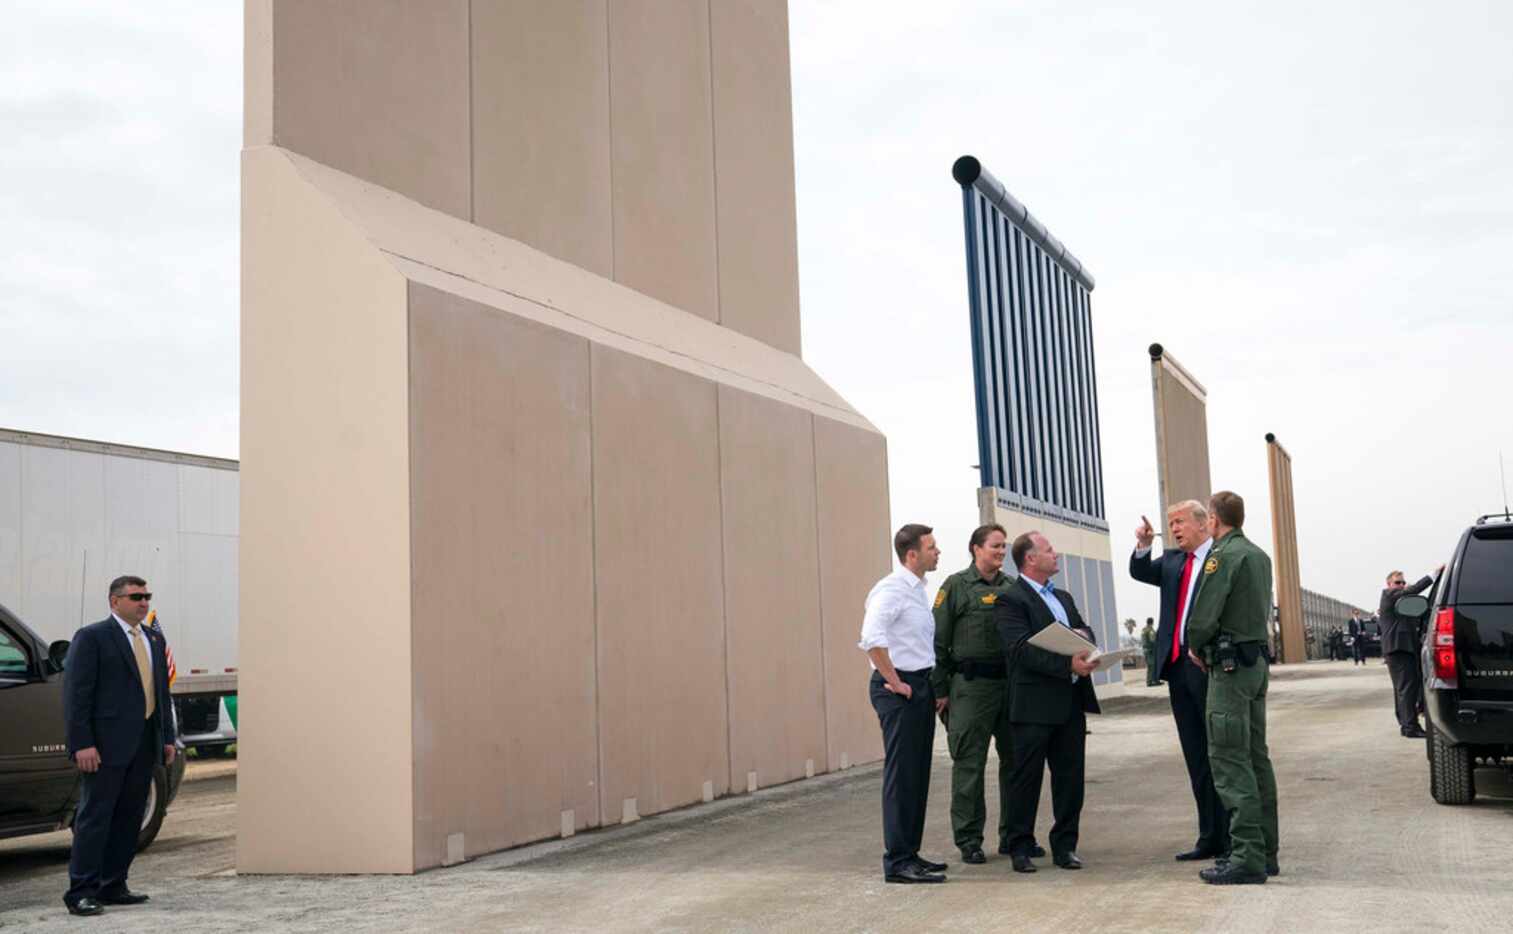 President Donald Trump views prototypes of border walls in San Diego, March 13, 2018. In one...